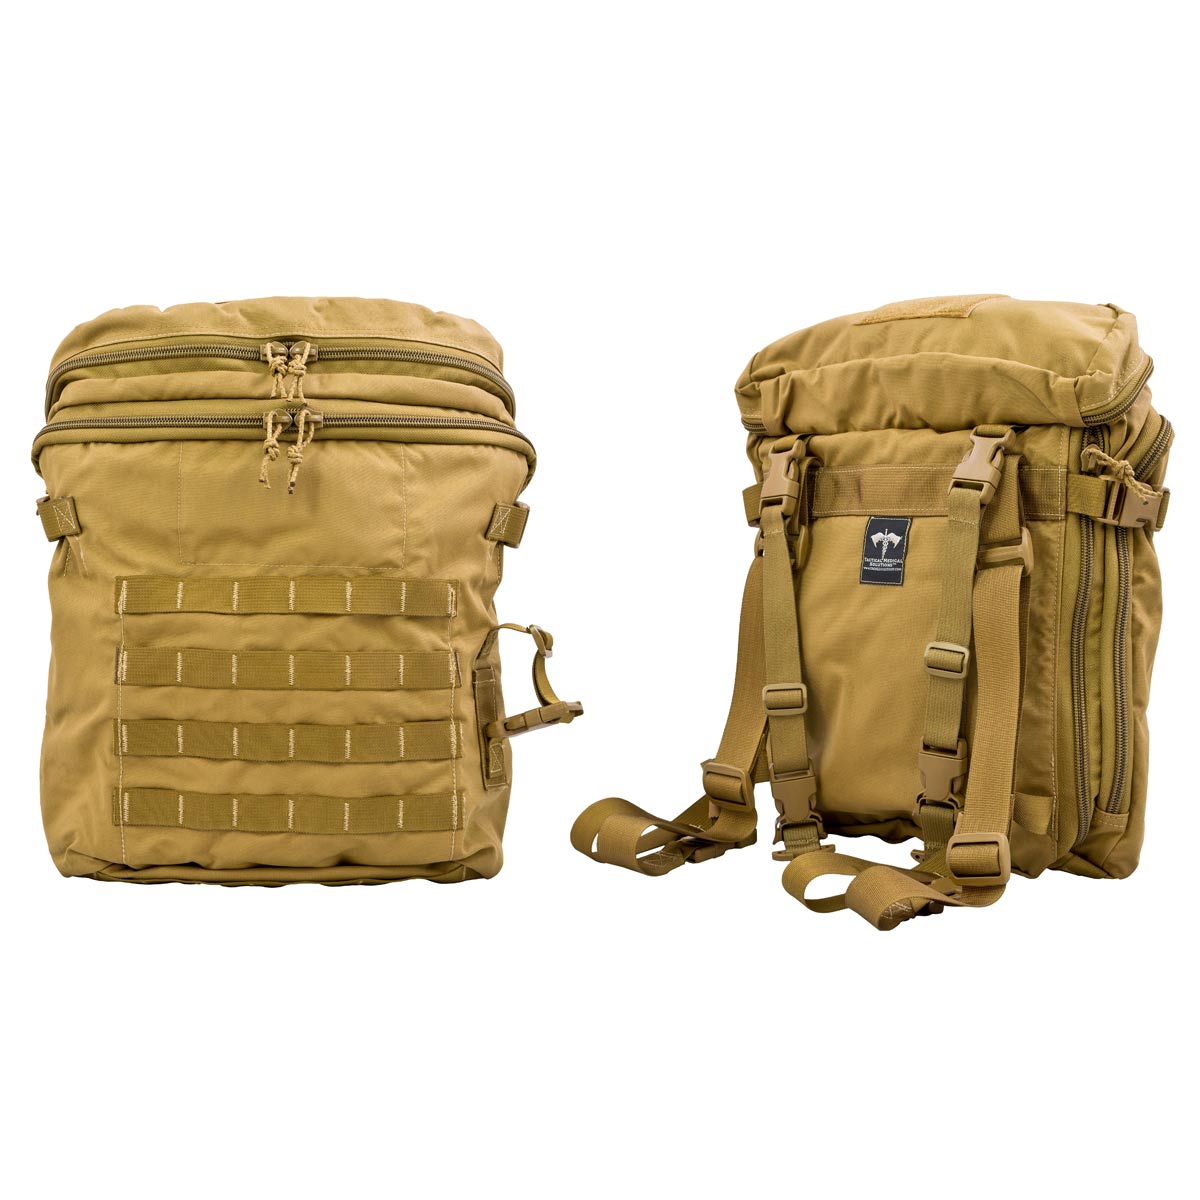 TacMed™ R-AID® Kit front and back side by side view